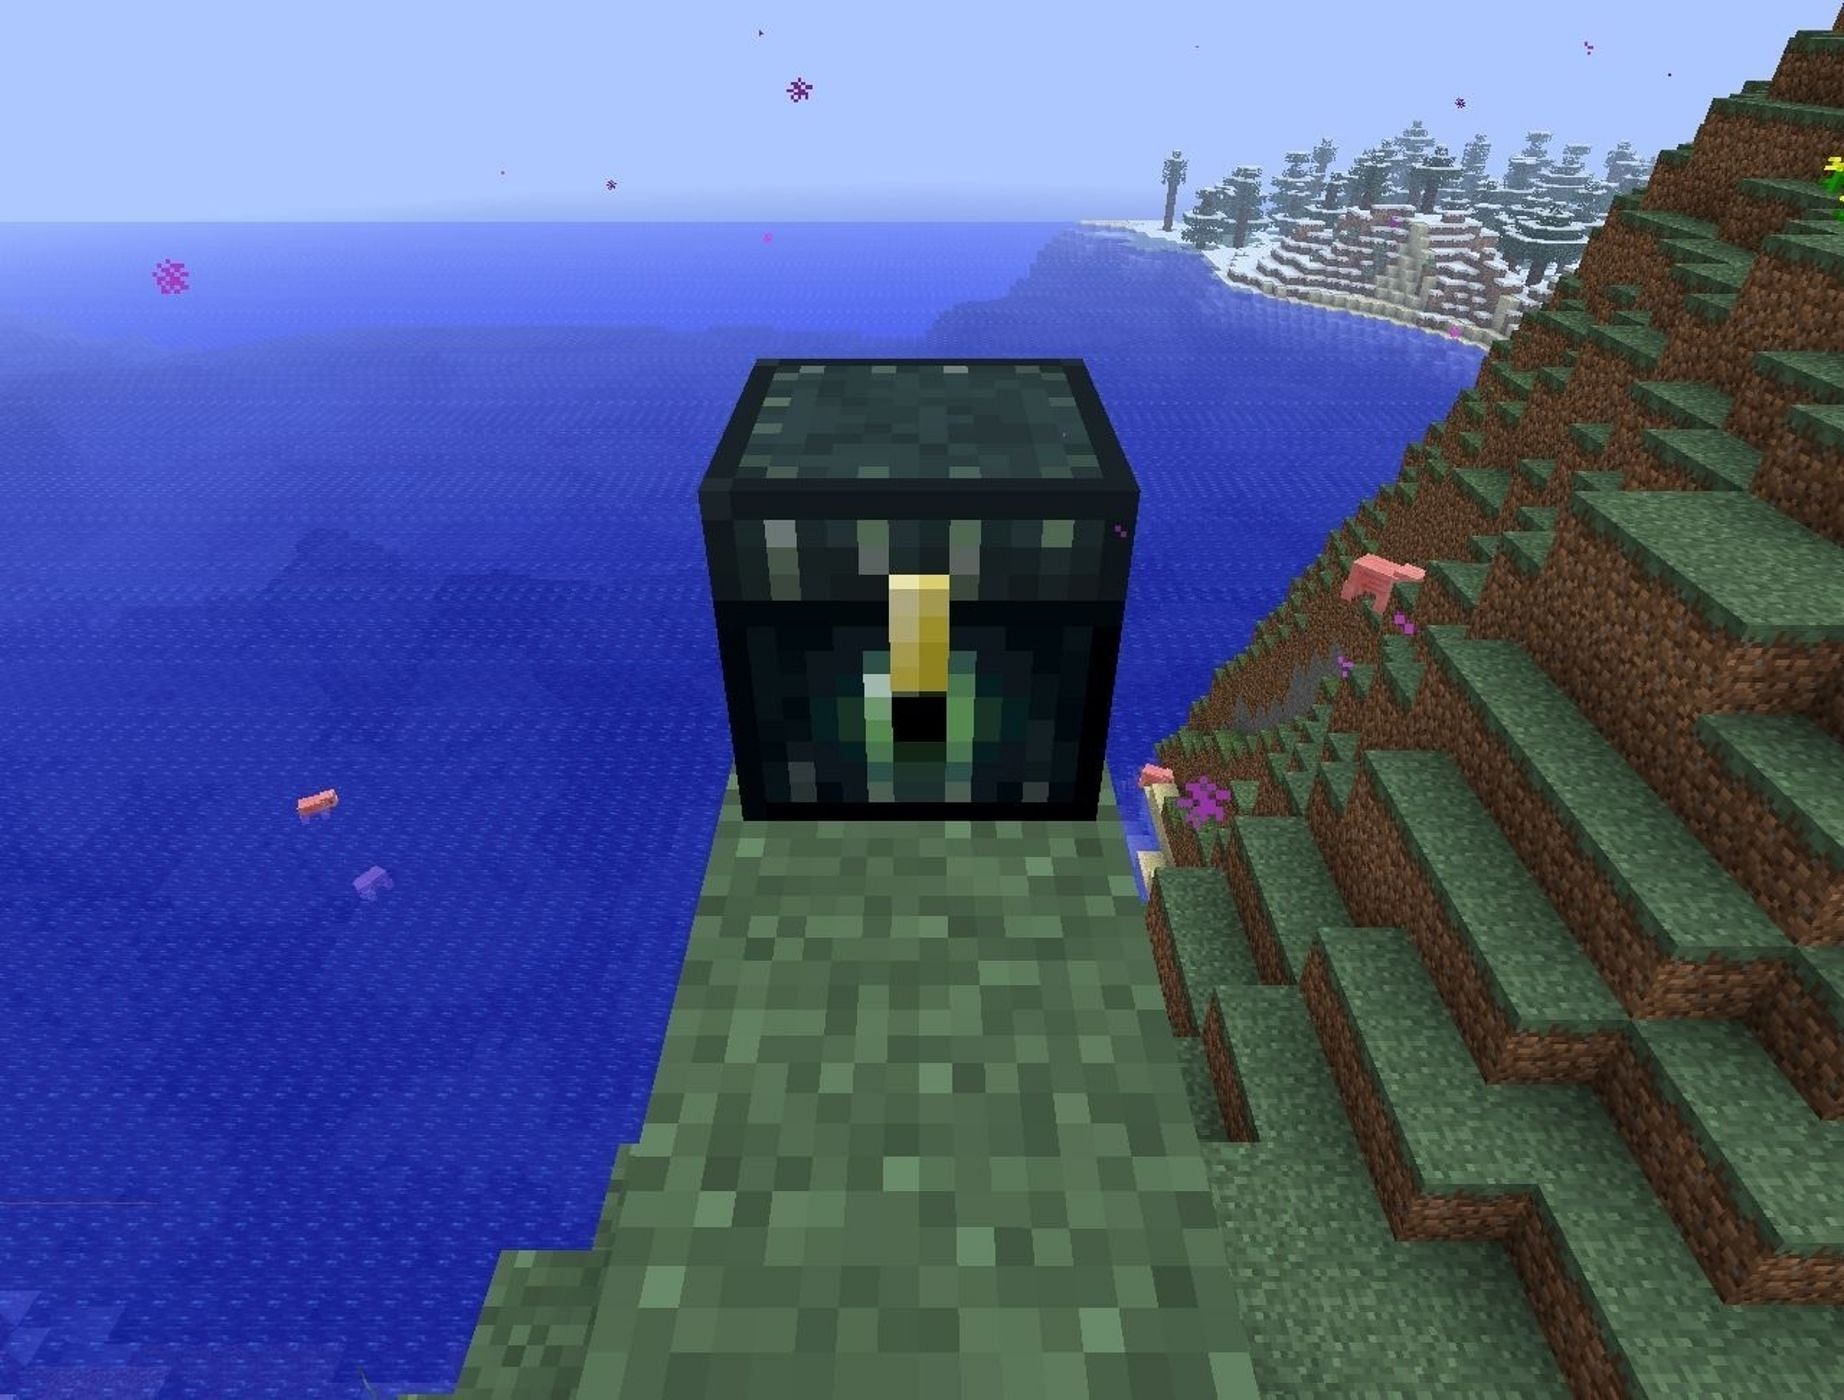 Ender chests keep items safe from prying eyes without trapping (Image via Mojang)